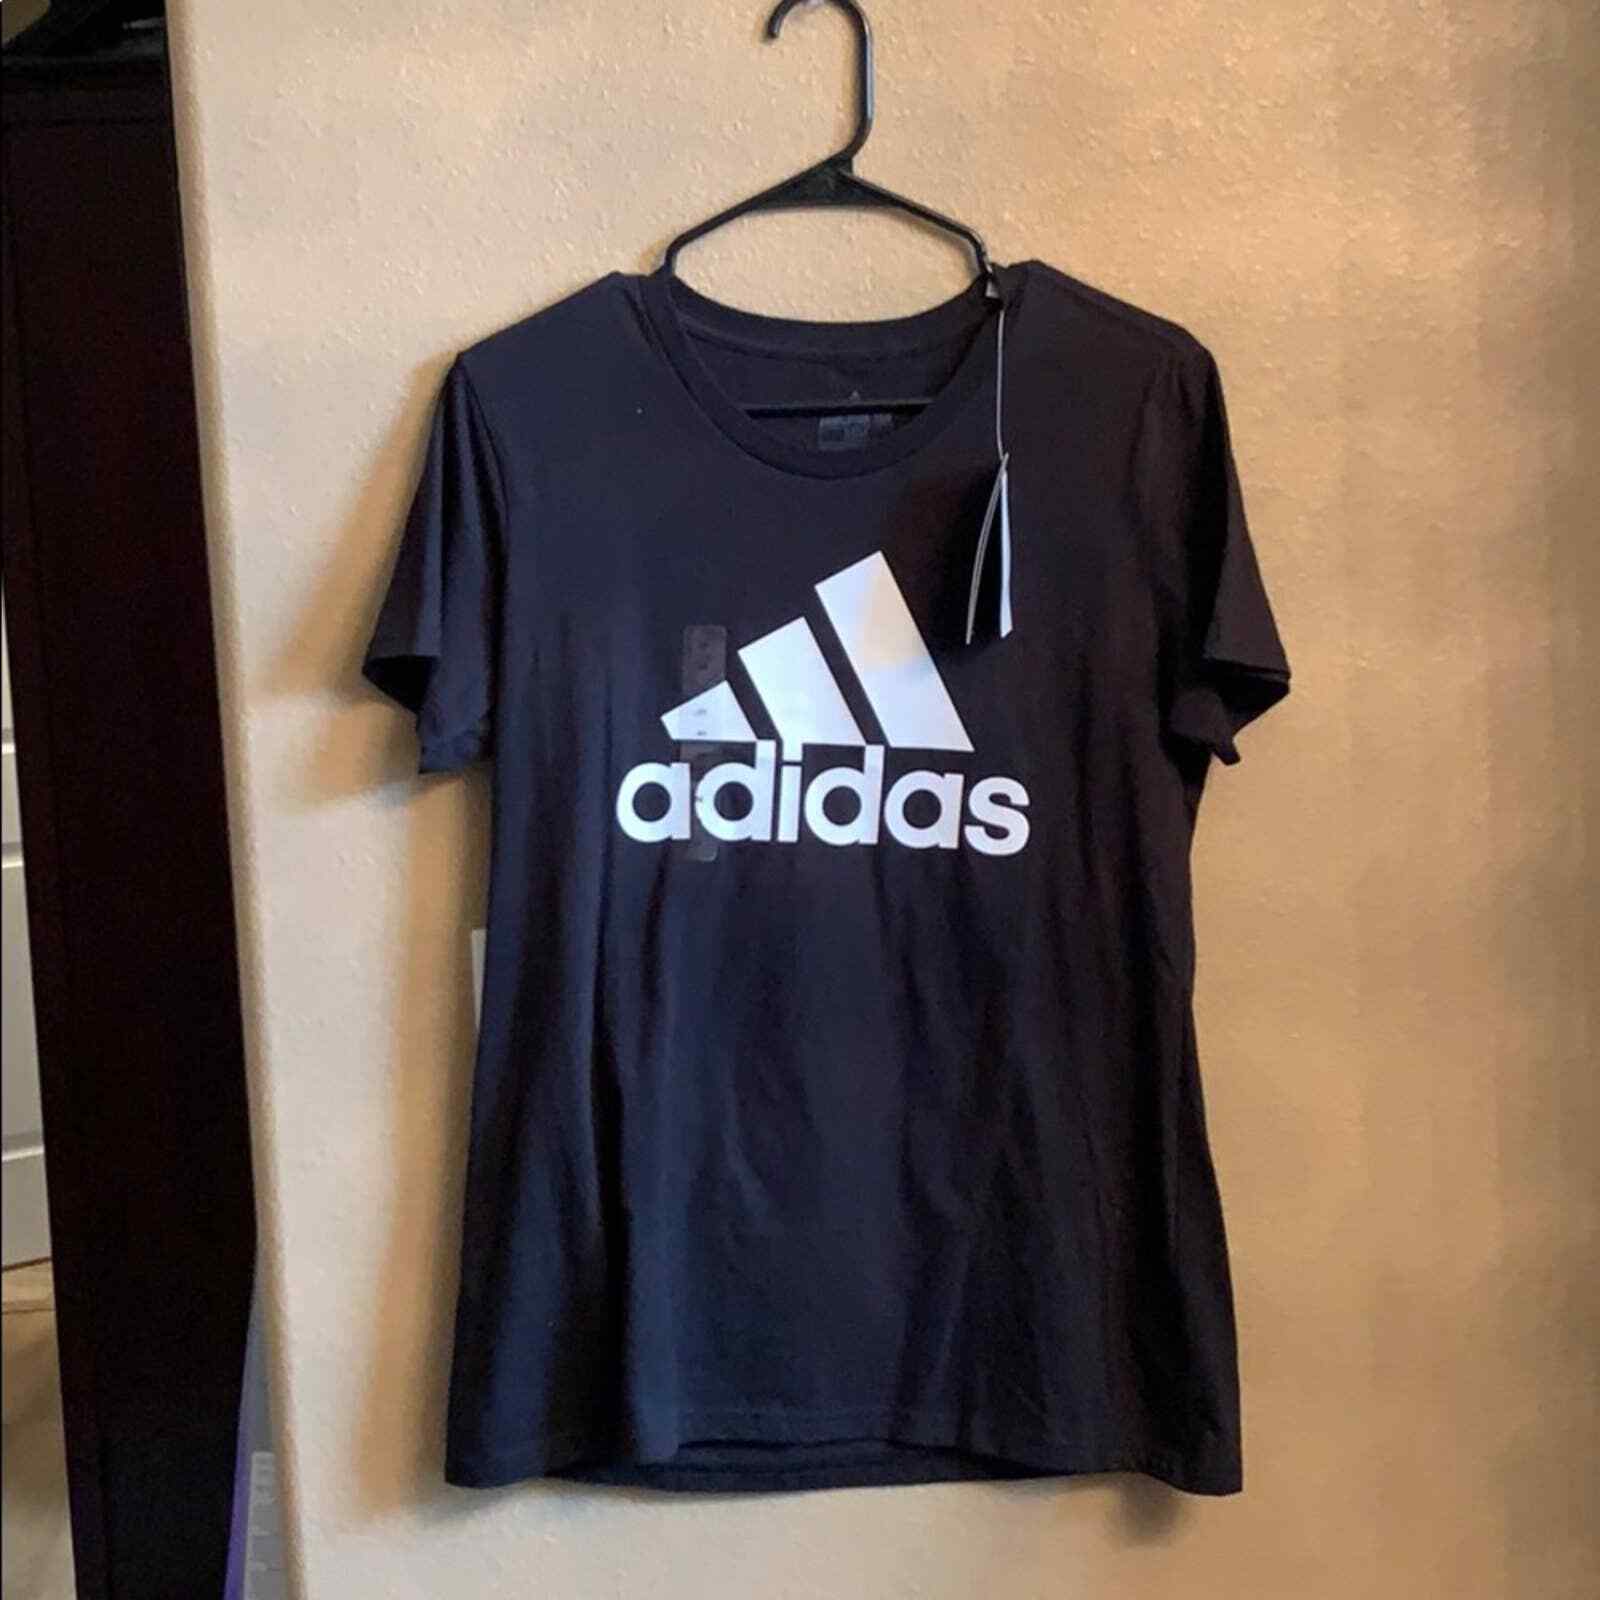 Primary image for NEW Adidas Black T-Shirt with White Logo